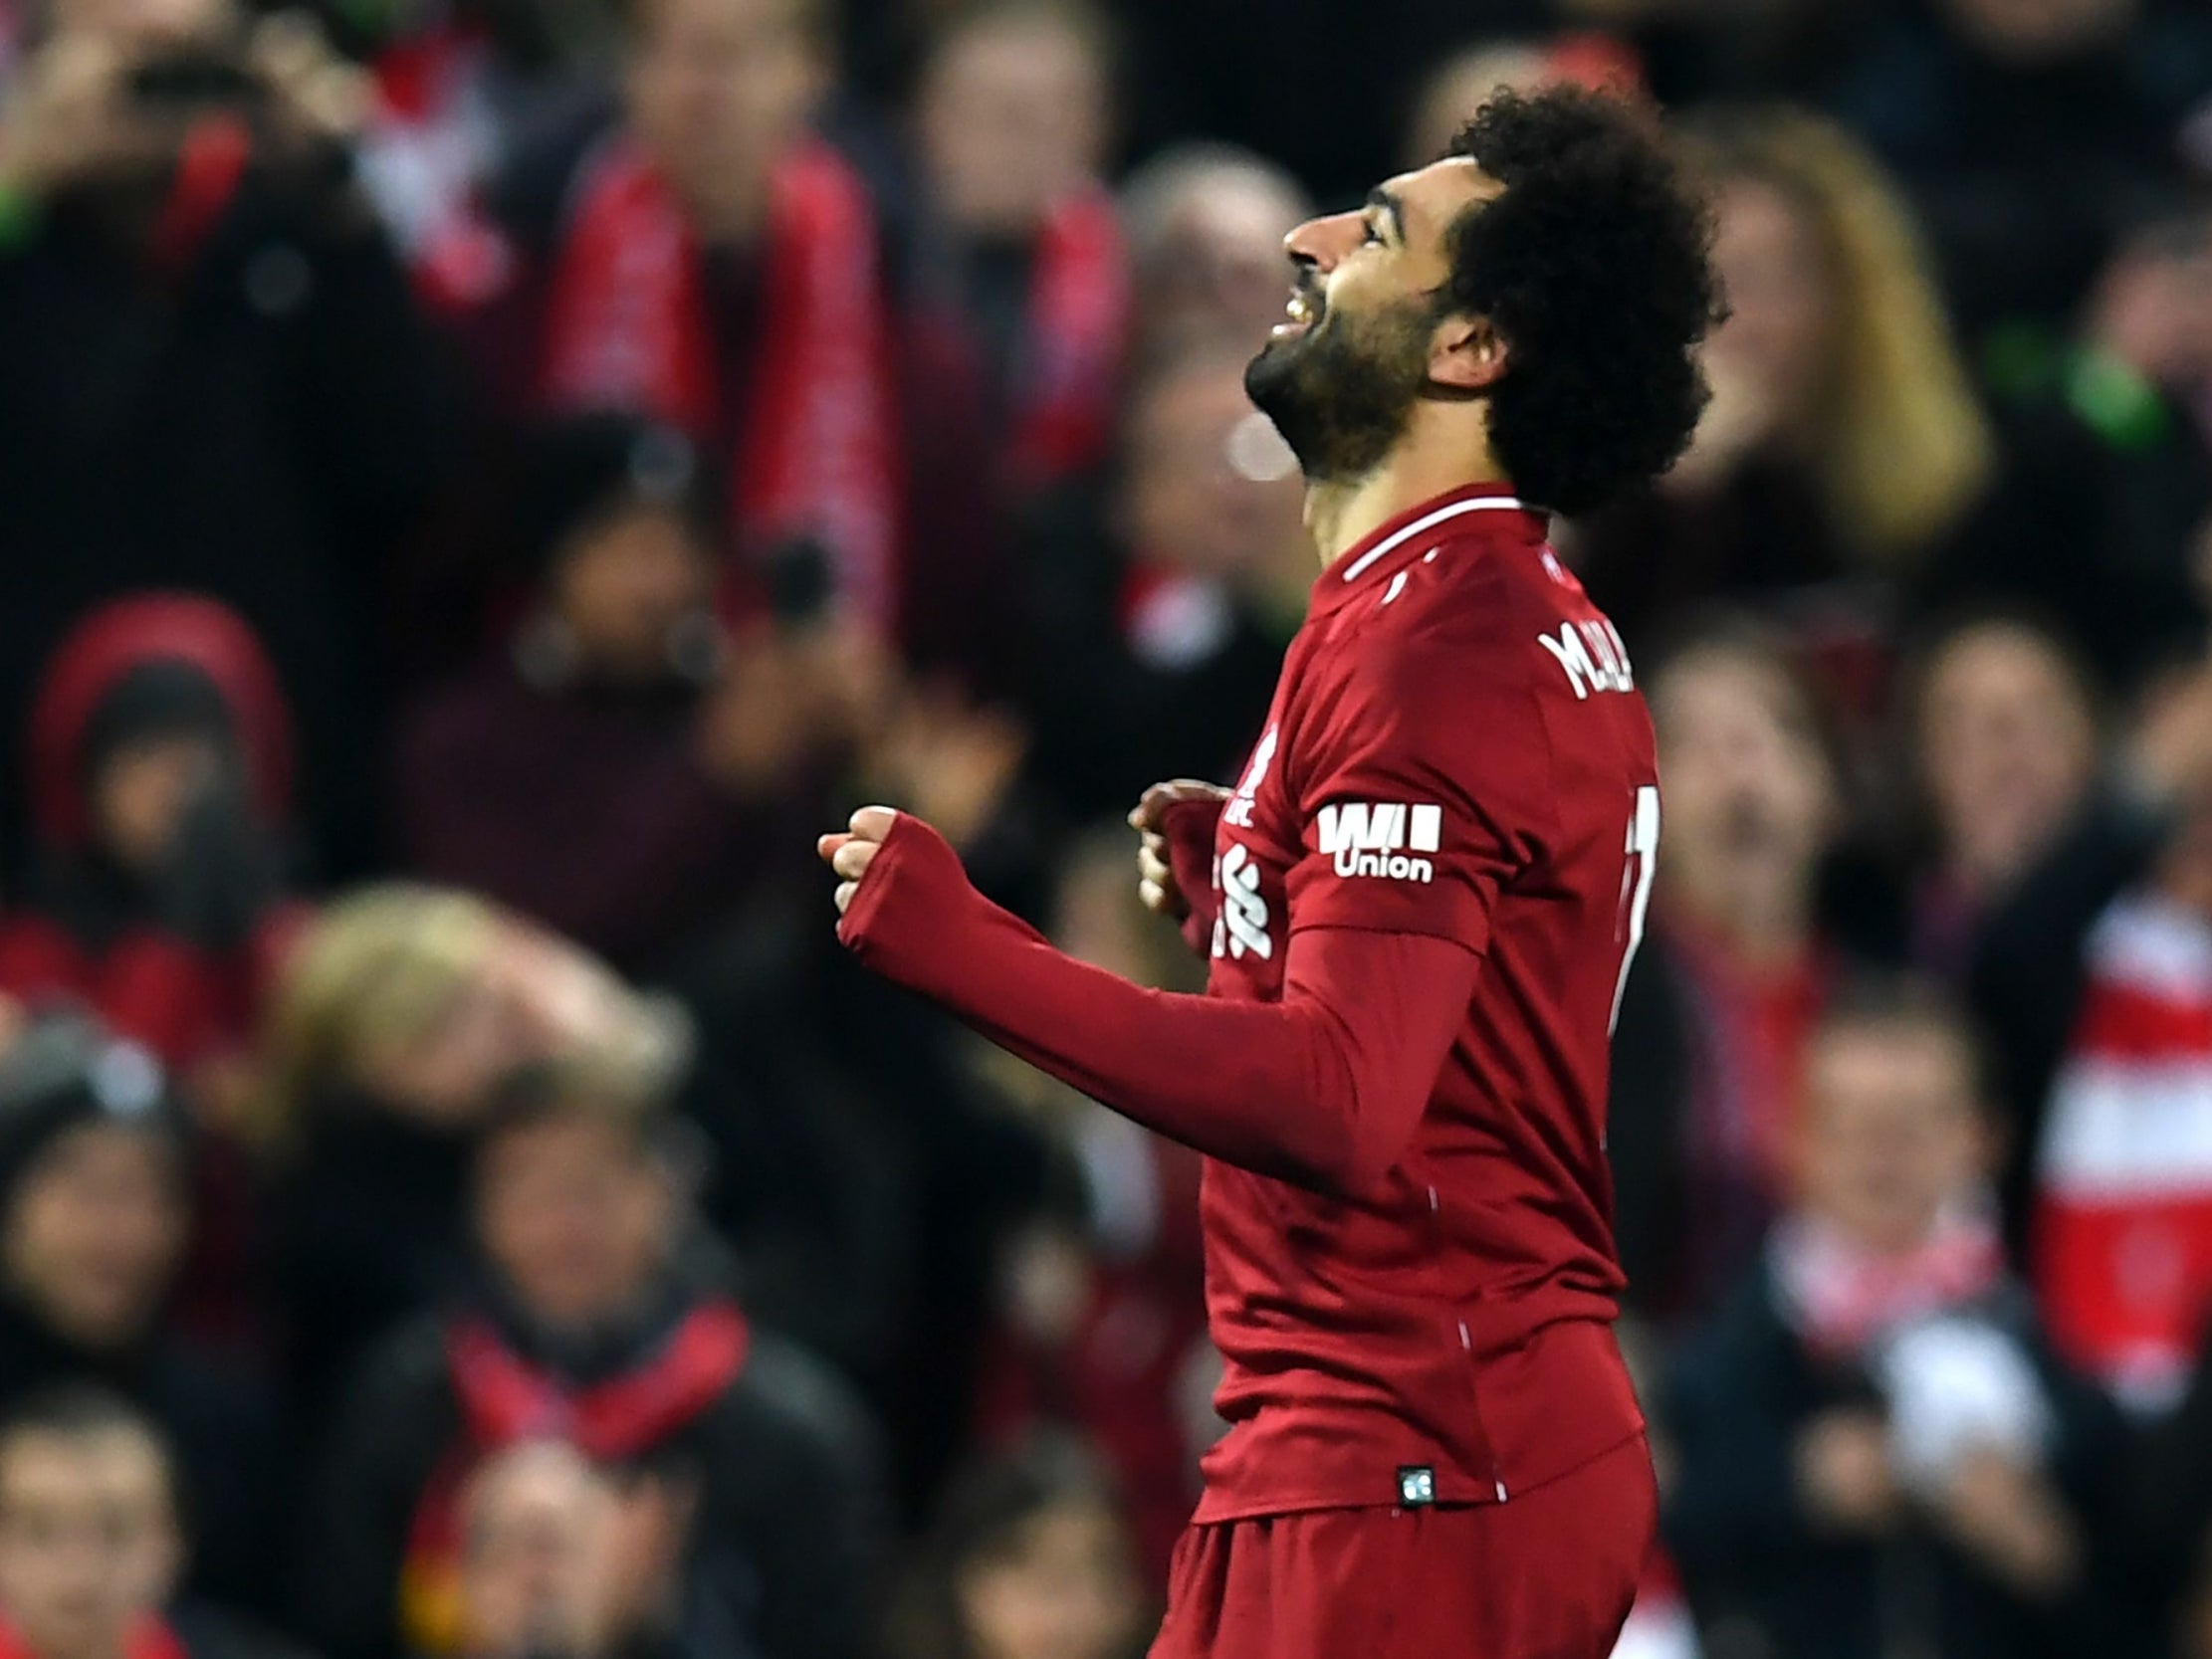 Salah is the player to watch